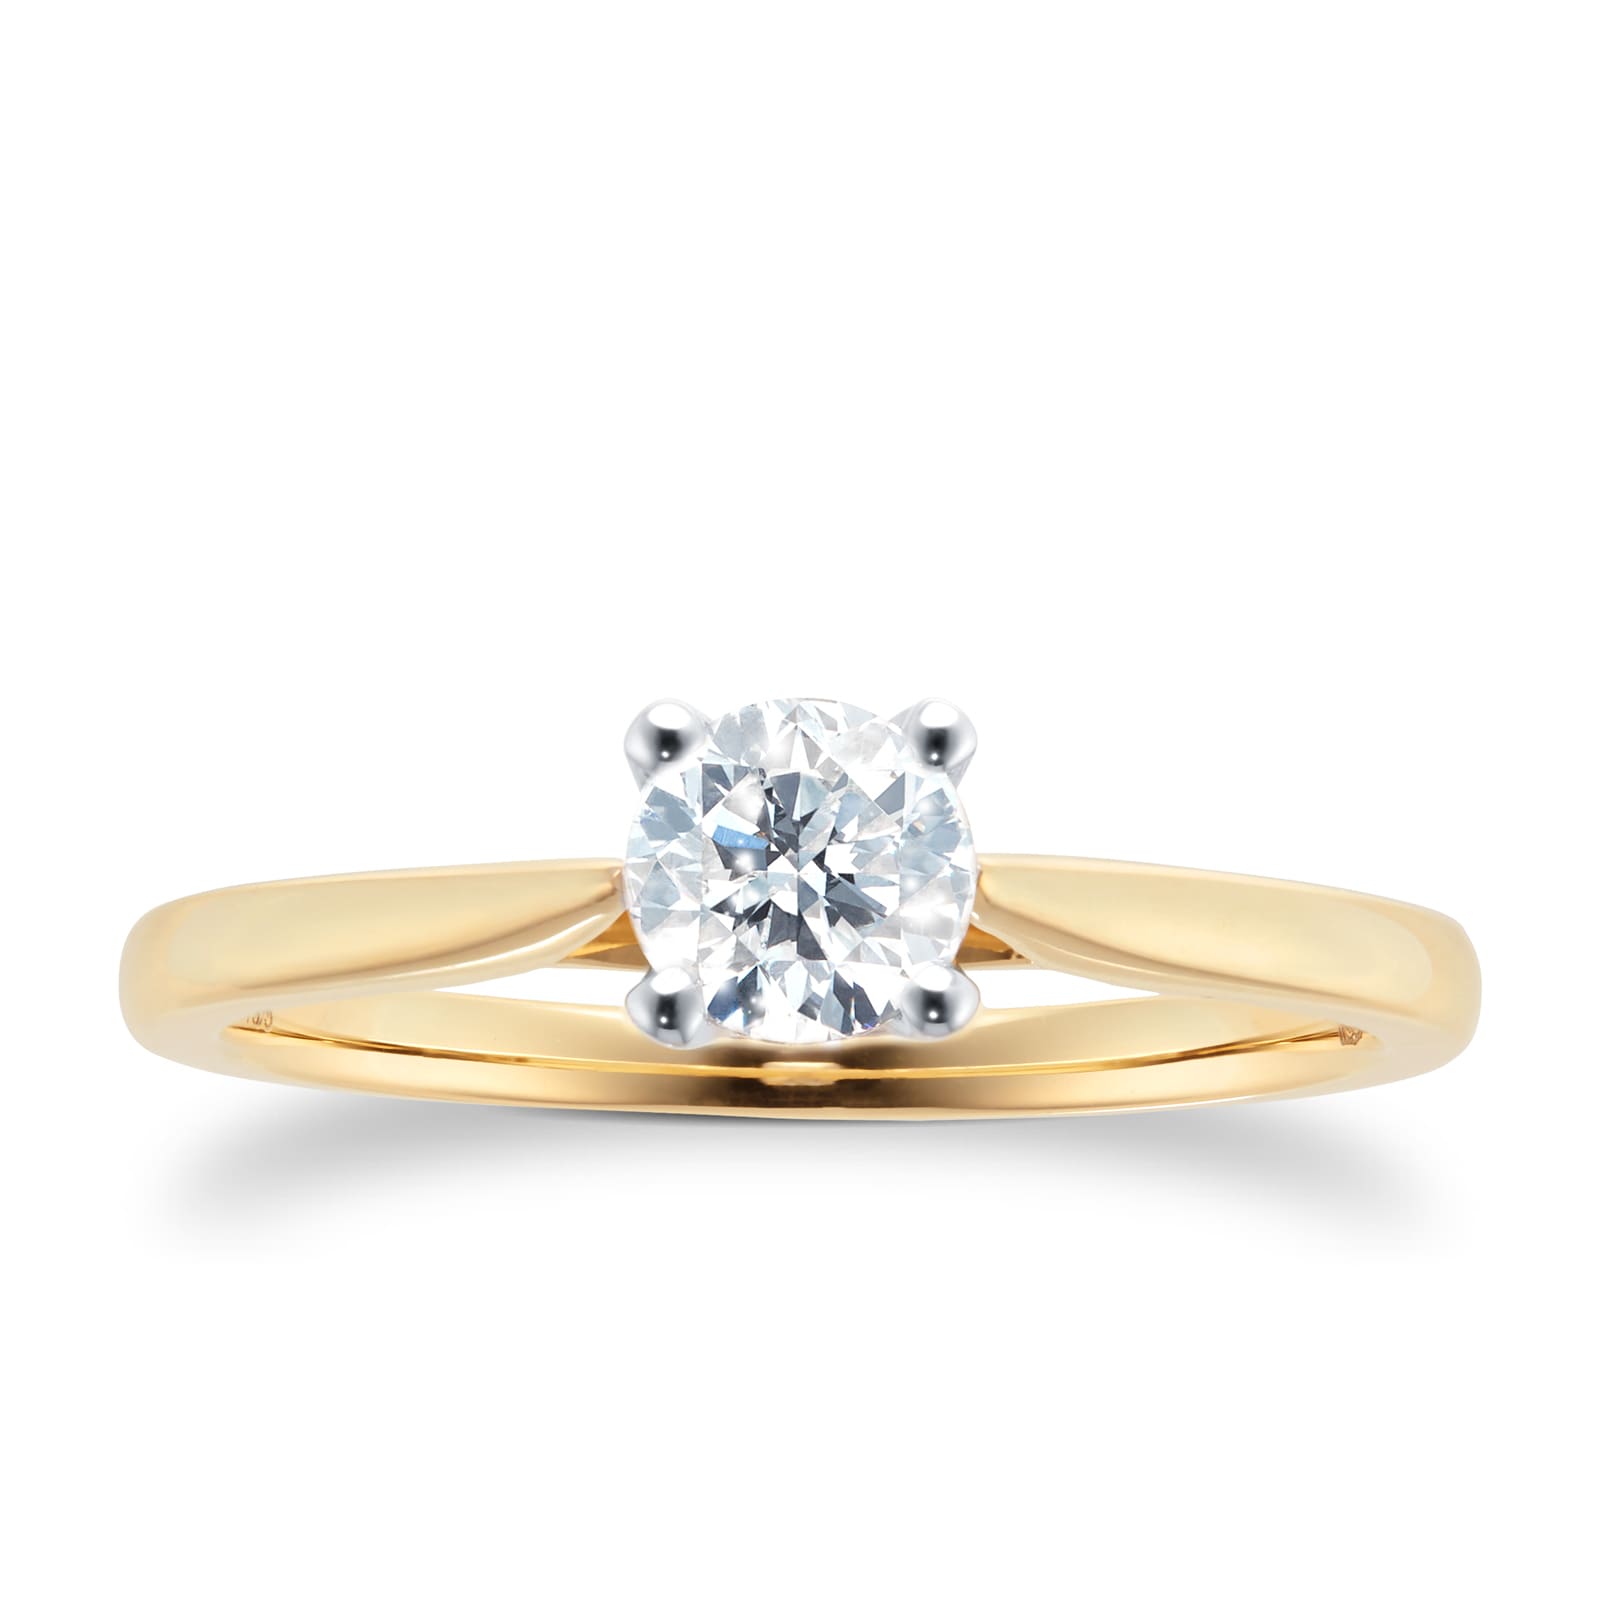 18ct Yellow Gold Brilliant Cut 0.50ct Goldsmiths Brightest Diamond Solitaire Engagement Ring